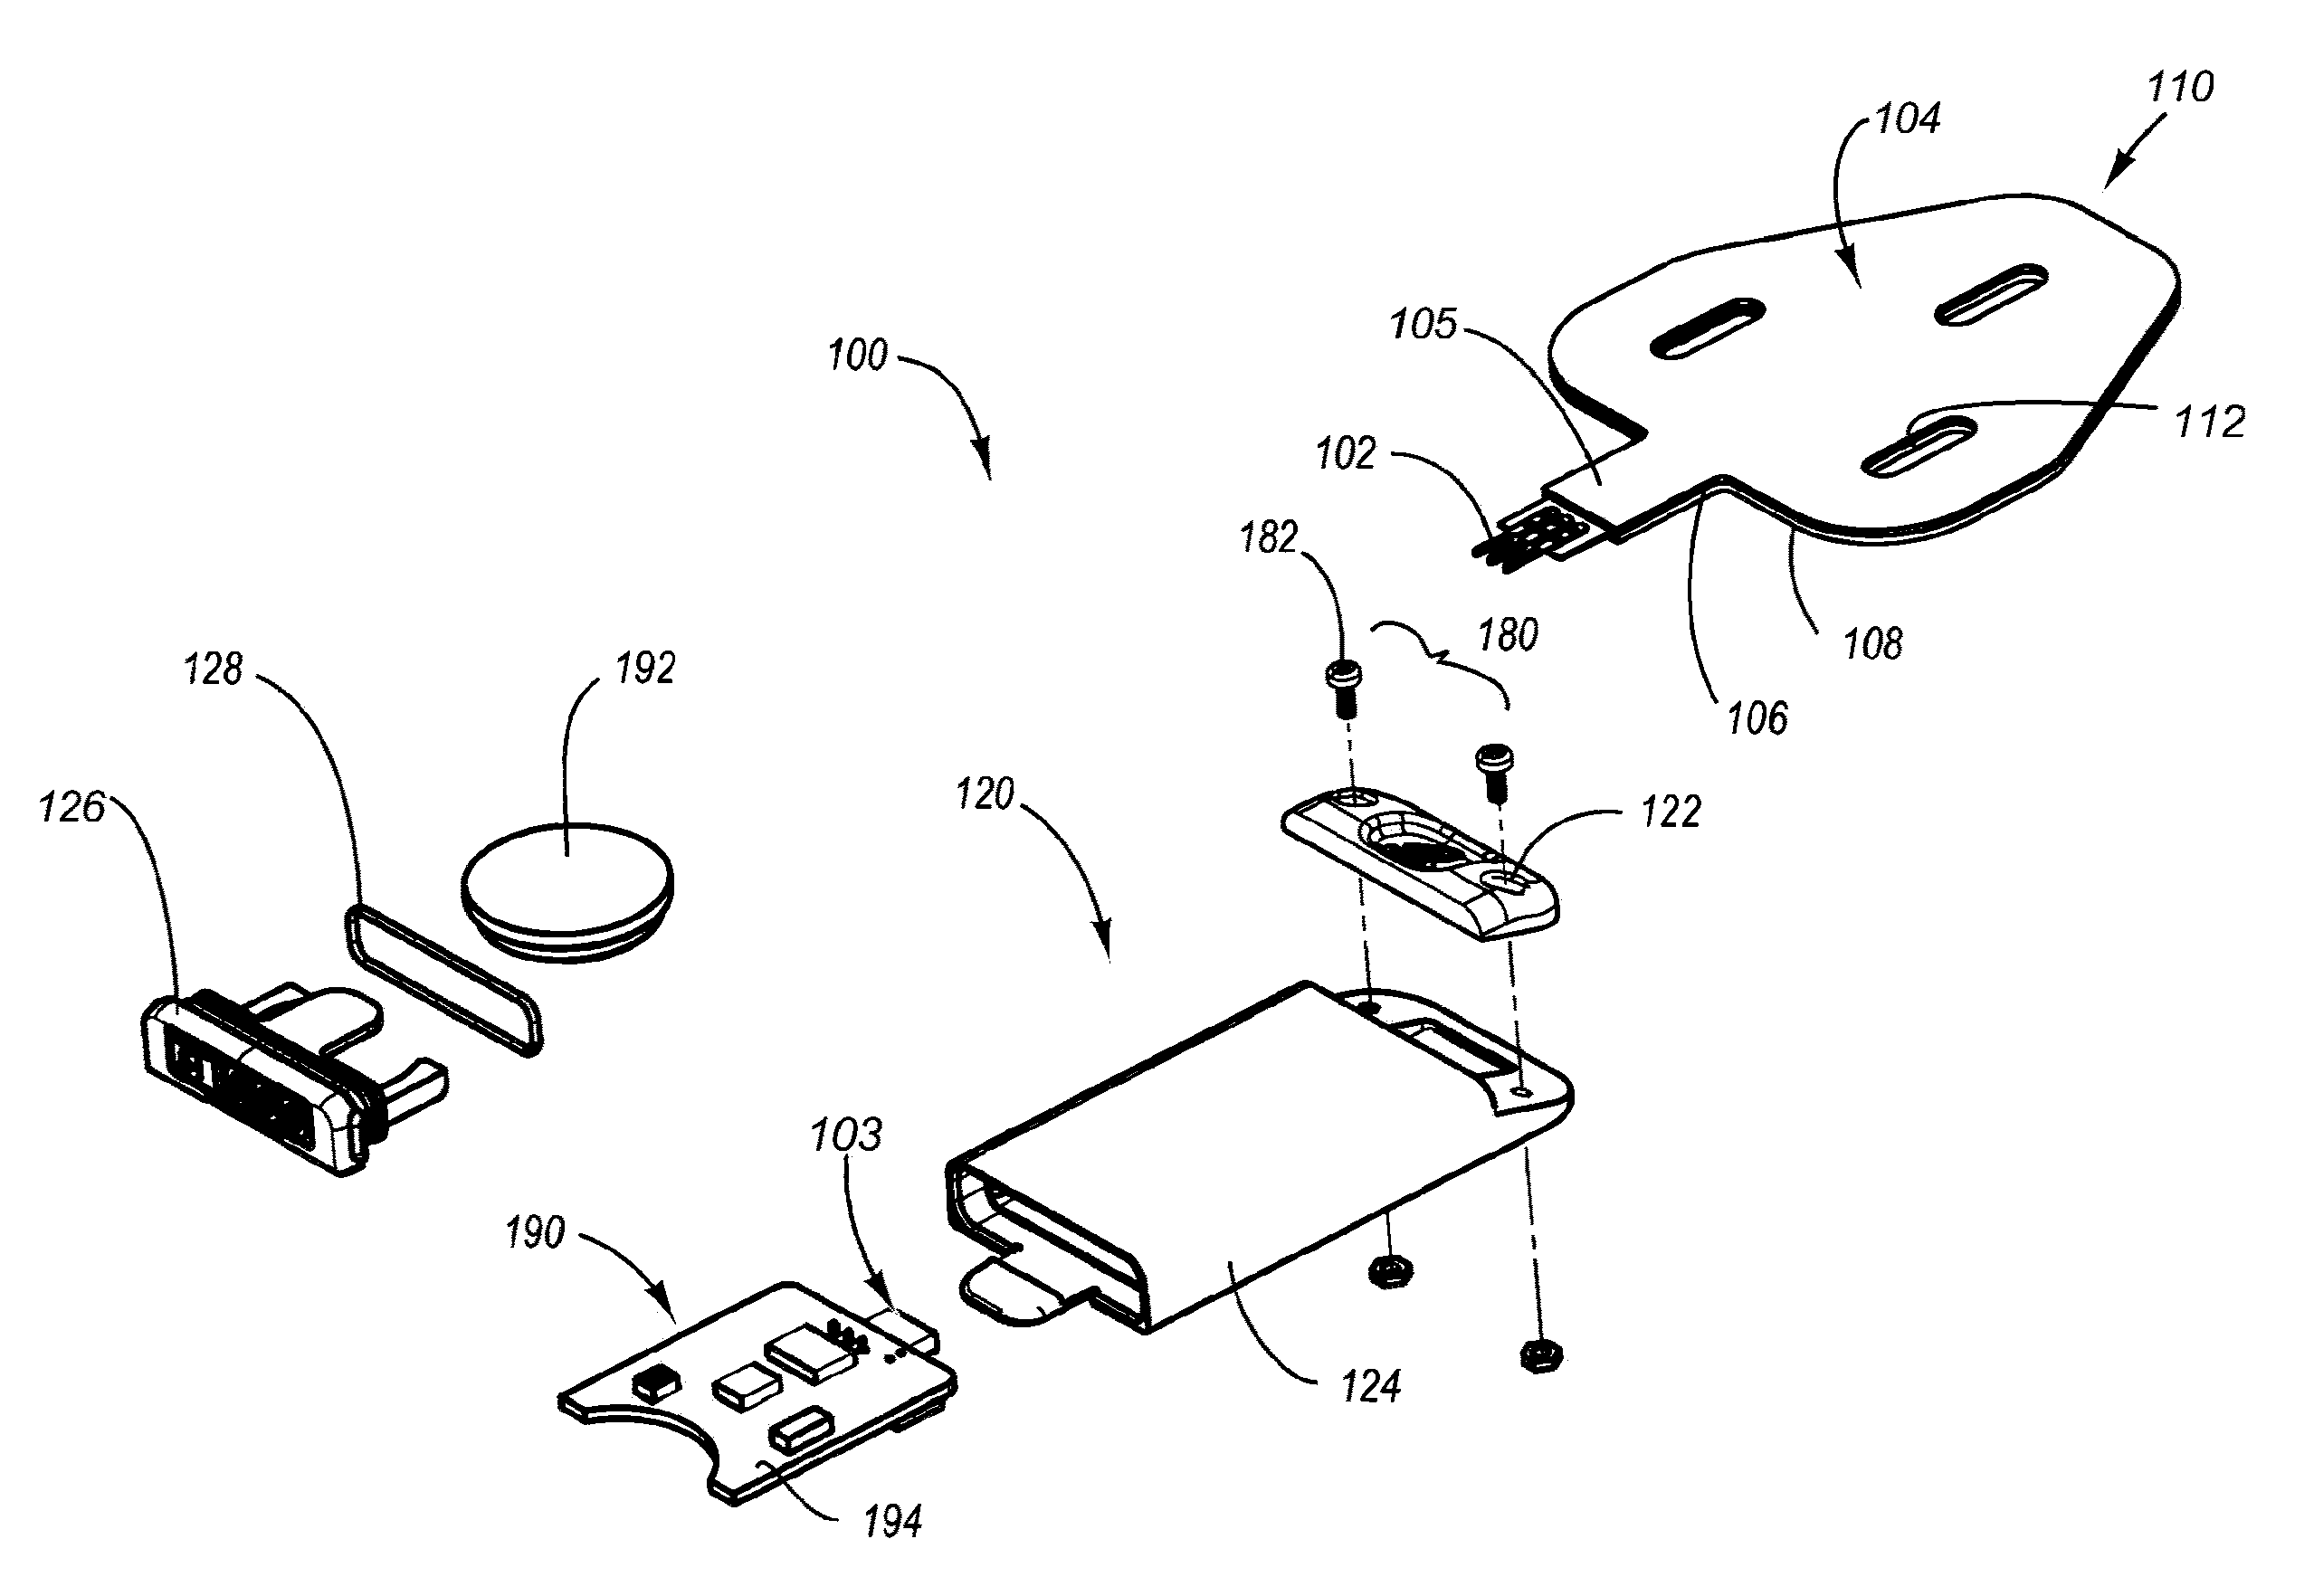 Systems and Methods of Power Output Measurement